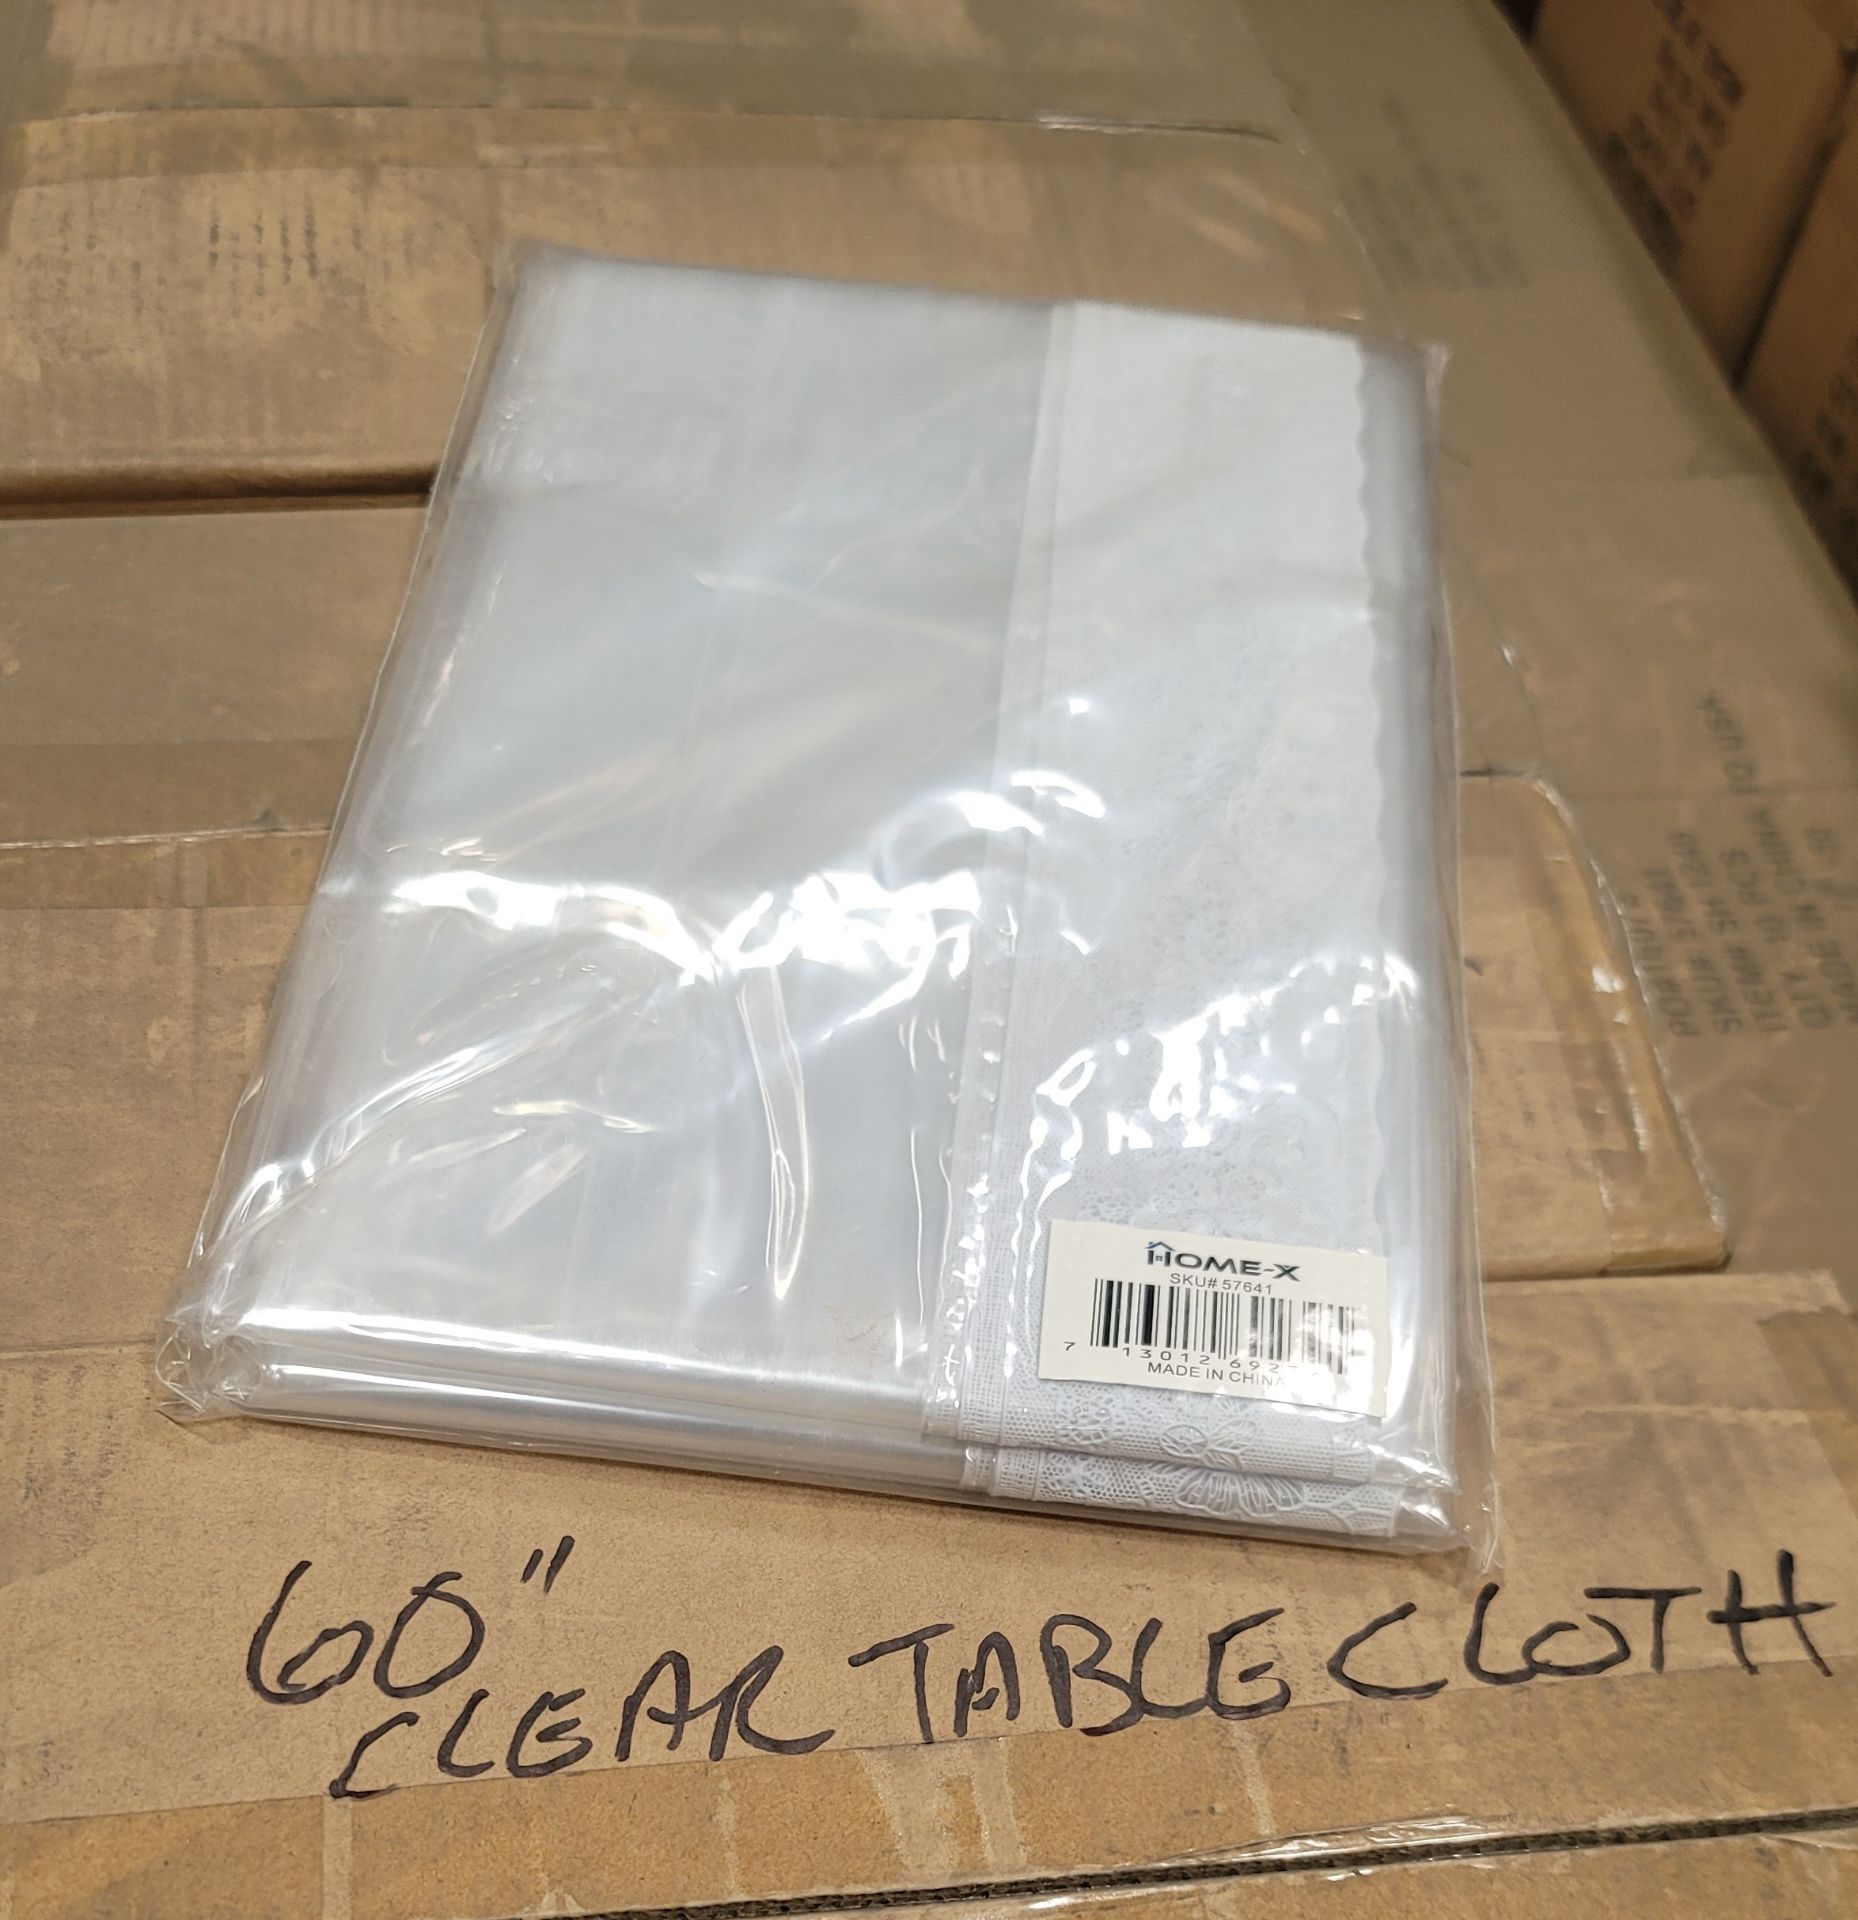 LOT - PALLET OF (300) 60" X 72" CLEAR PLASTIC TABLE COVER W/ FLORAL DESIGN BORDER, (30 CASES/10